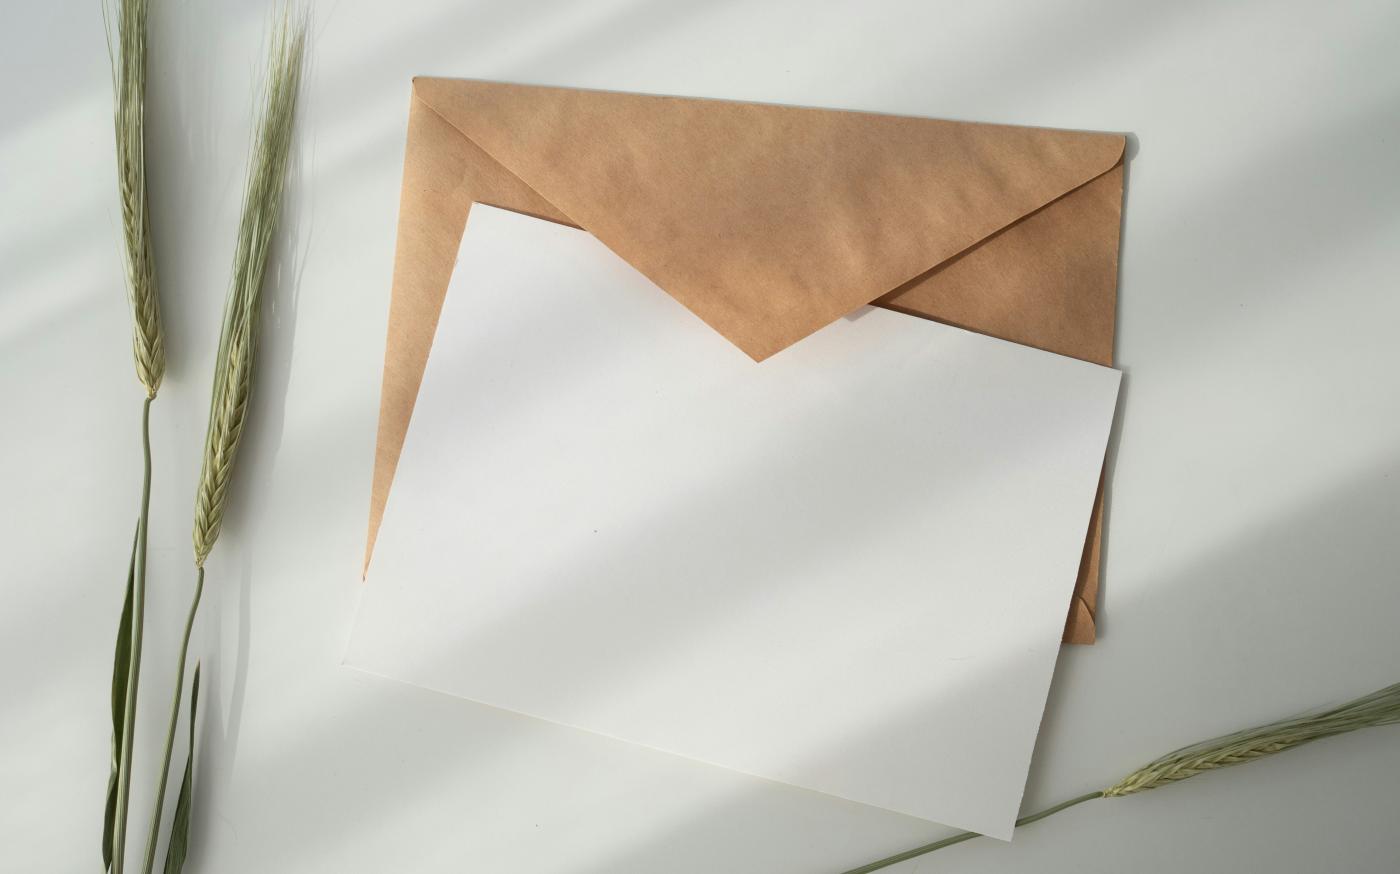 white paper and brown envelope by Kate Macate courtesy of Unsplash.